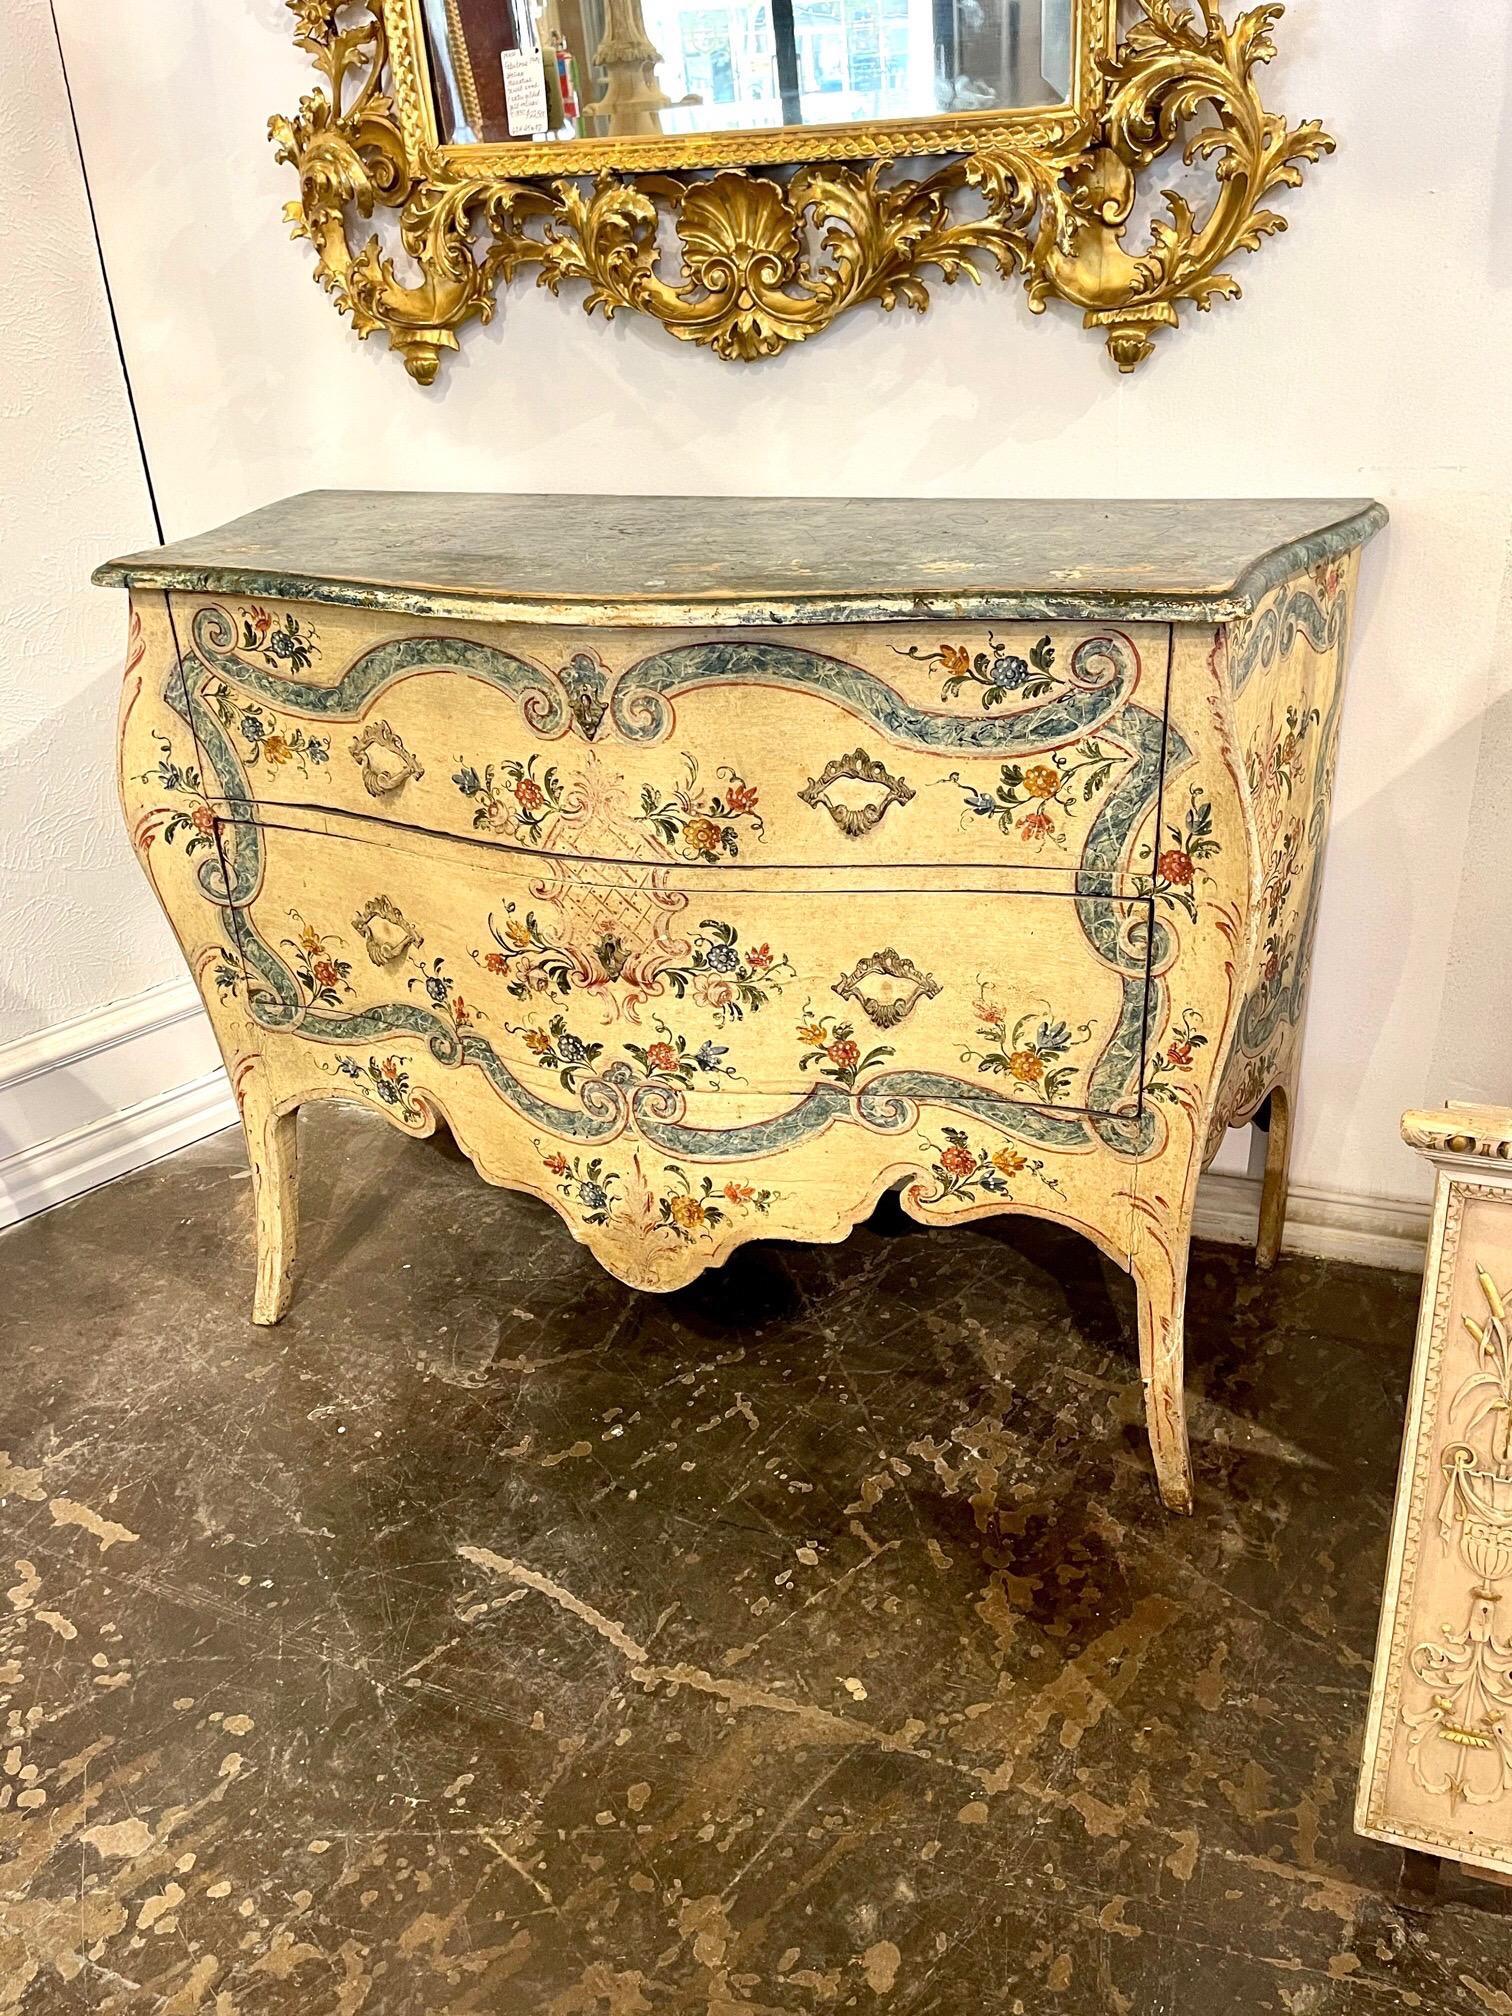 Lovely decorative 19th century Venetian hand painted bombe commode. Featuring beautiful floral images in the colors of blue, pink and gold. Great patina as well. So pretty!!